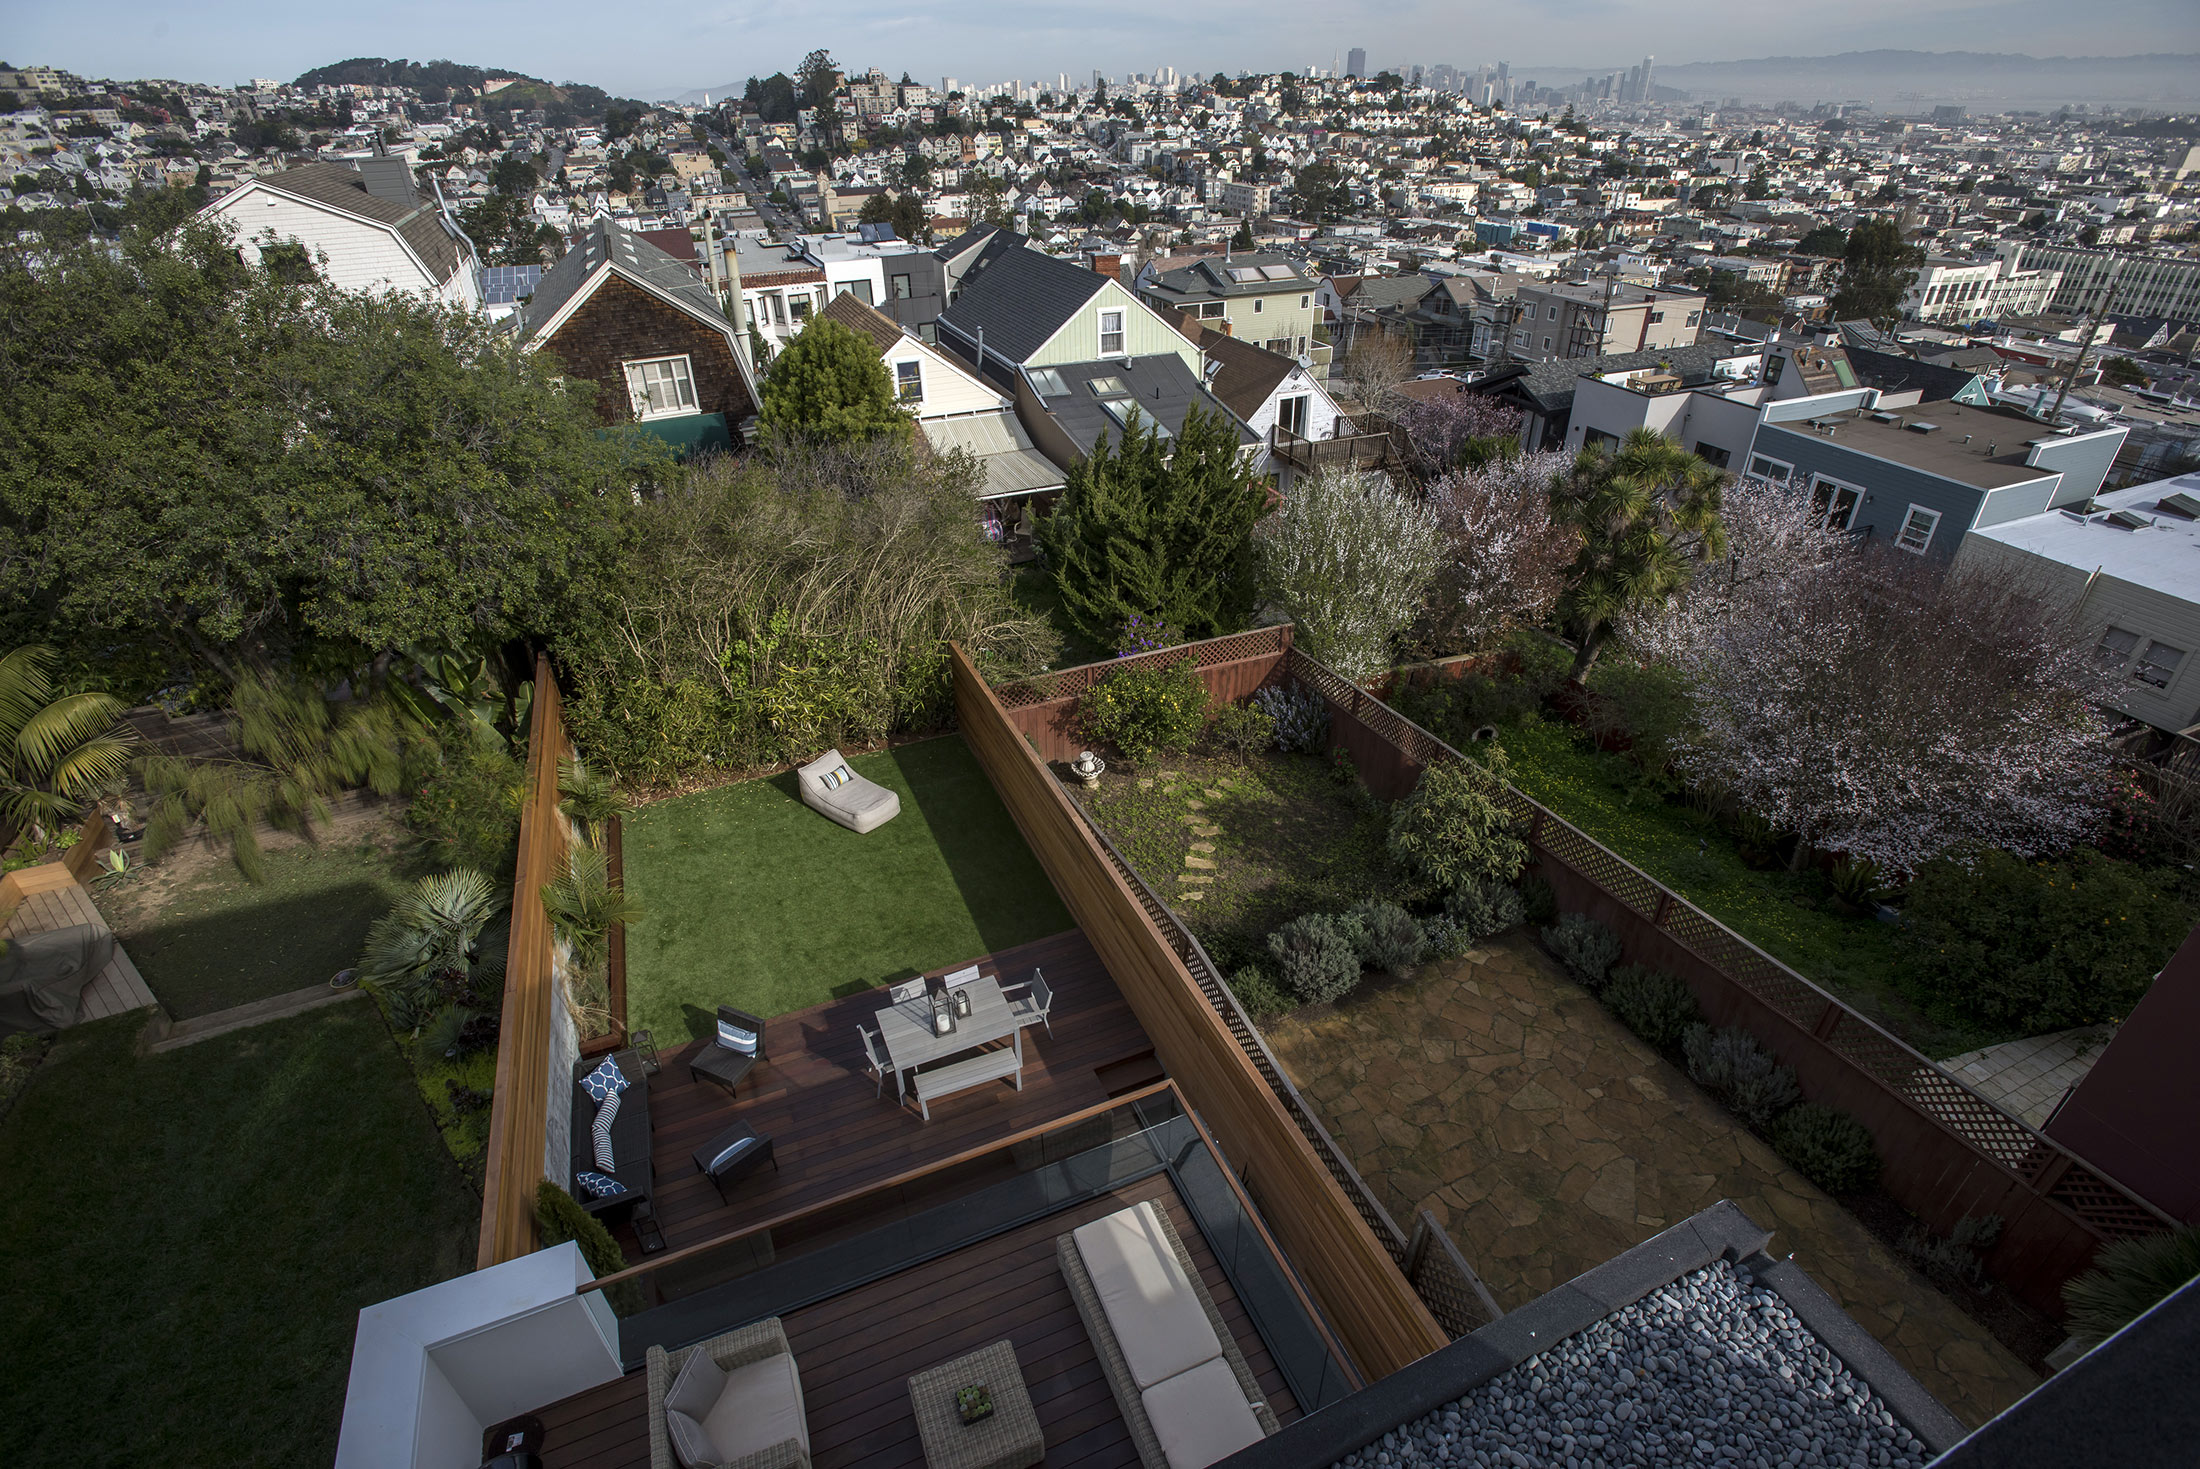 The view from the master bedroom balcony of a house listed in San Francisco, California, U.S., on Friday, Feb. 12, 2016.
